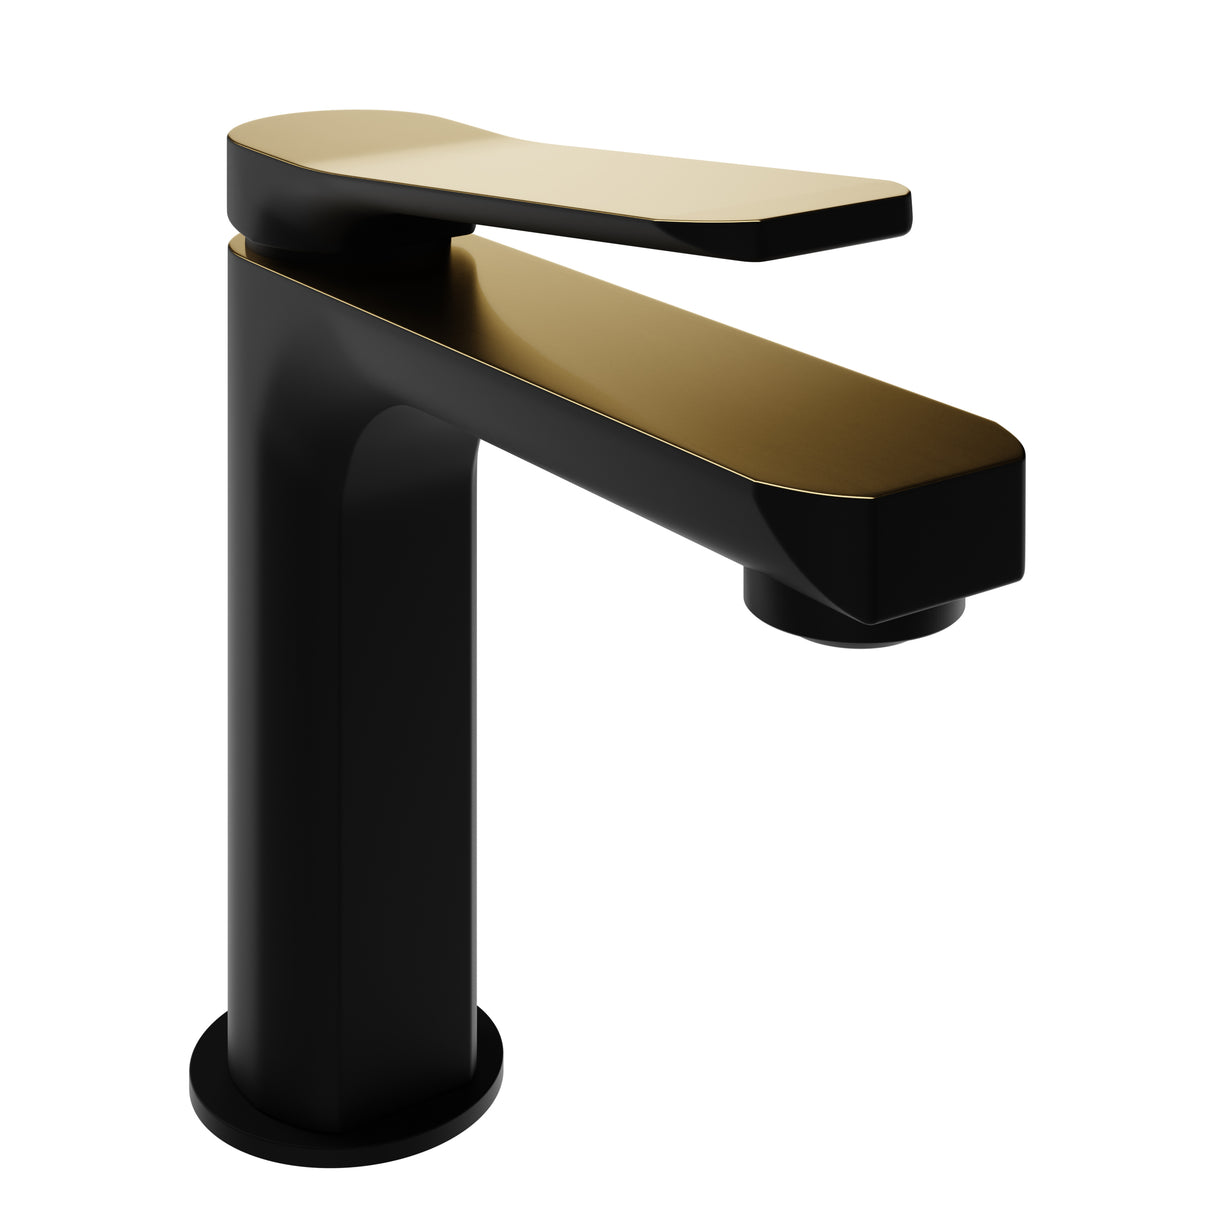 ANZZI L-AZ900MB-BG Single Handle Single Hole Bathroom Faucet With Pop-up Drain in Matte Black & Brushed Gold